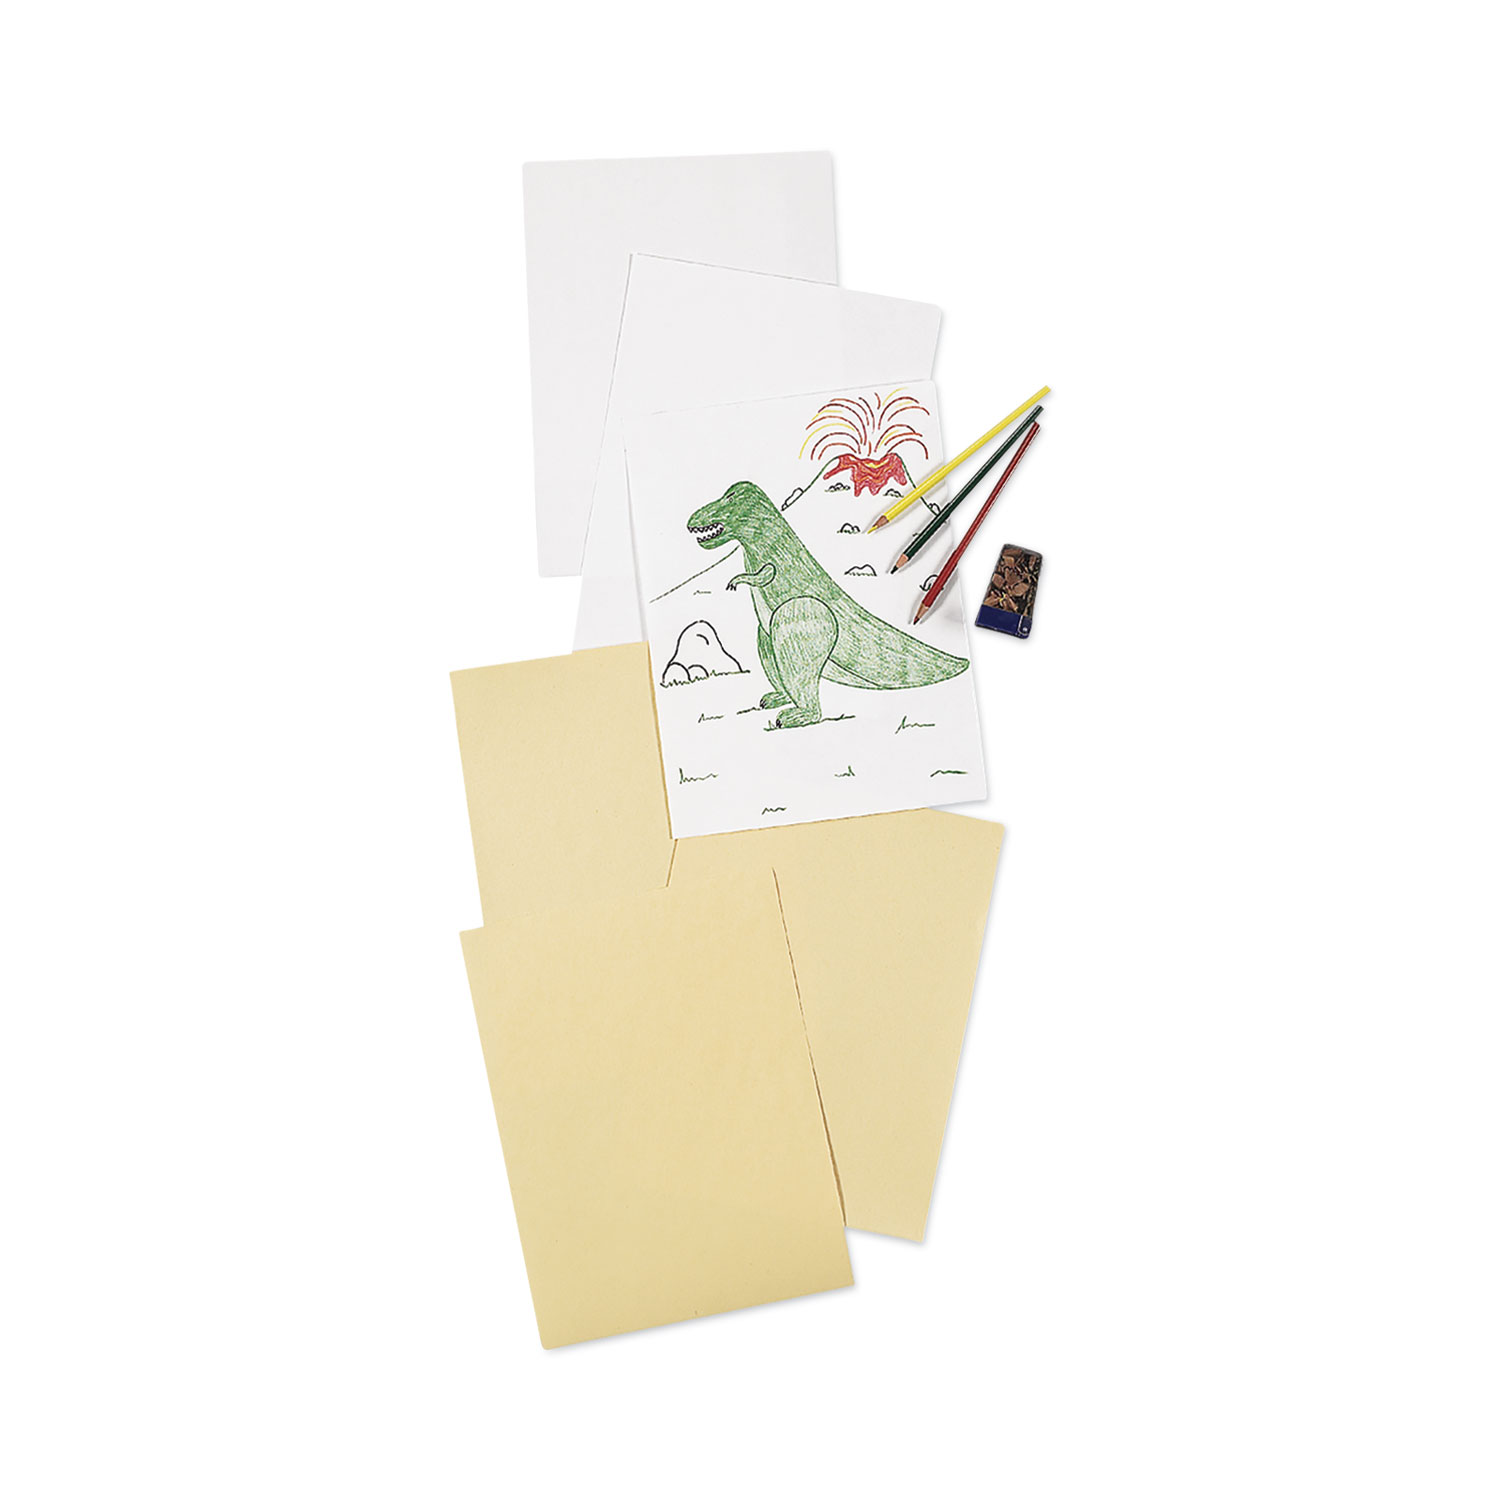 Pacon White Drawing Paper, 47lb, 12 x 18, Pure White, 500/Ream